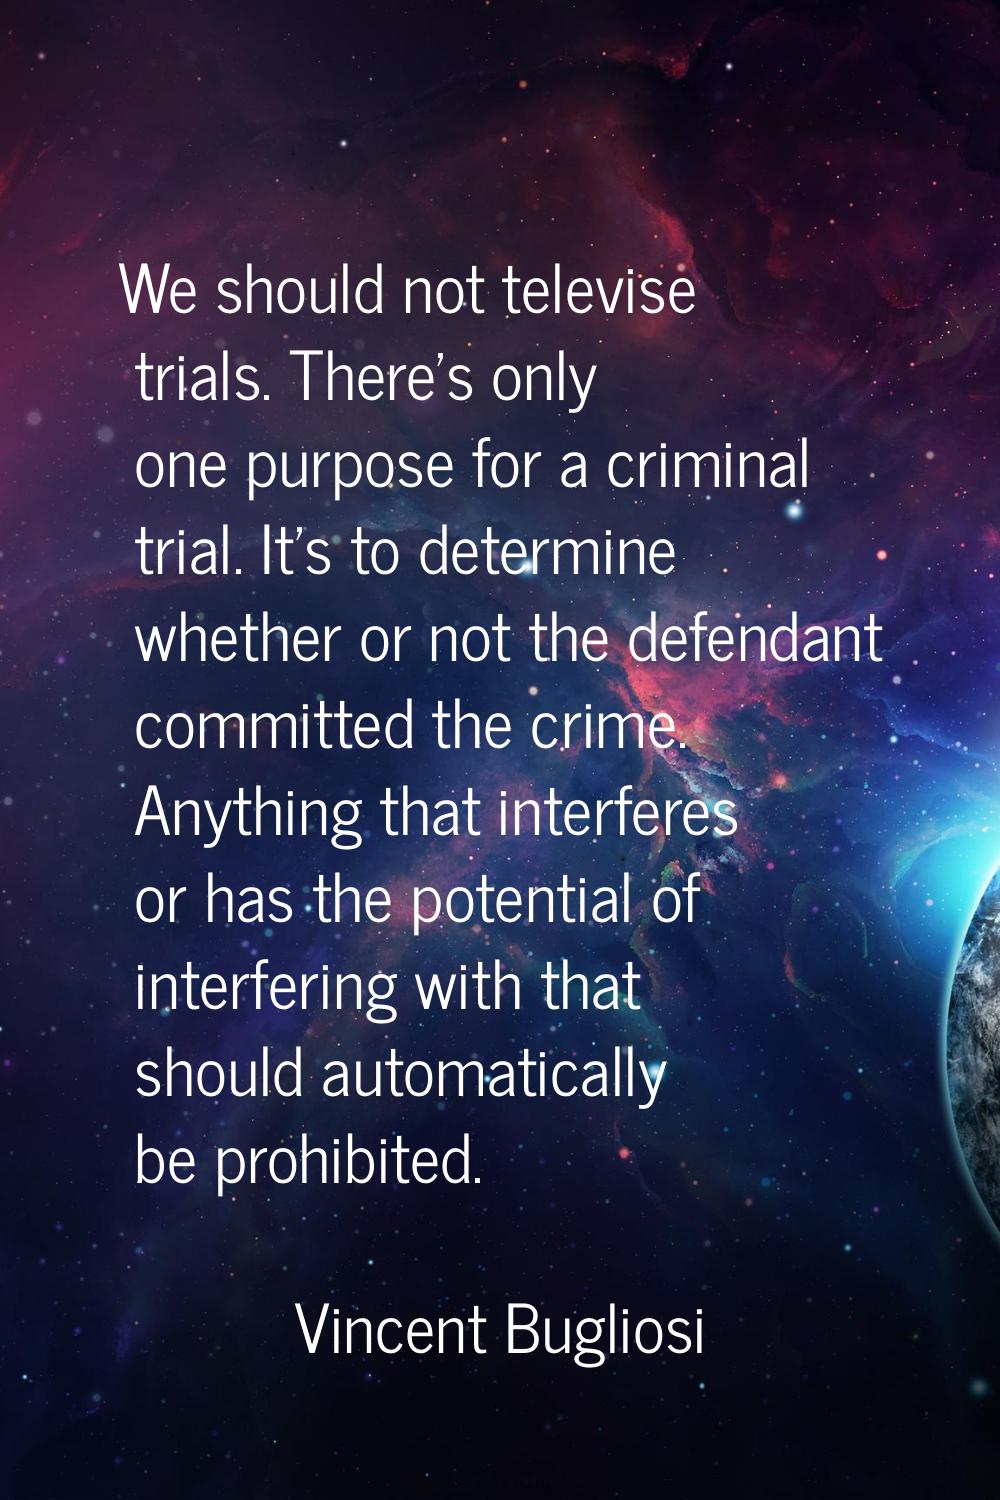 We should not televise trials. There's only one purpose for a criminal trial. It's to determine whe